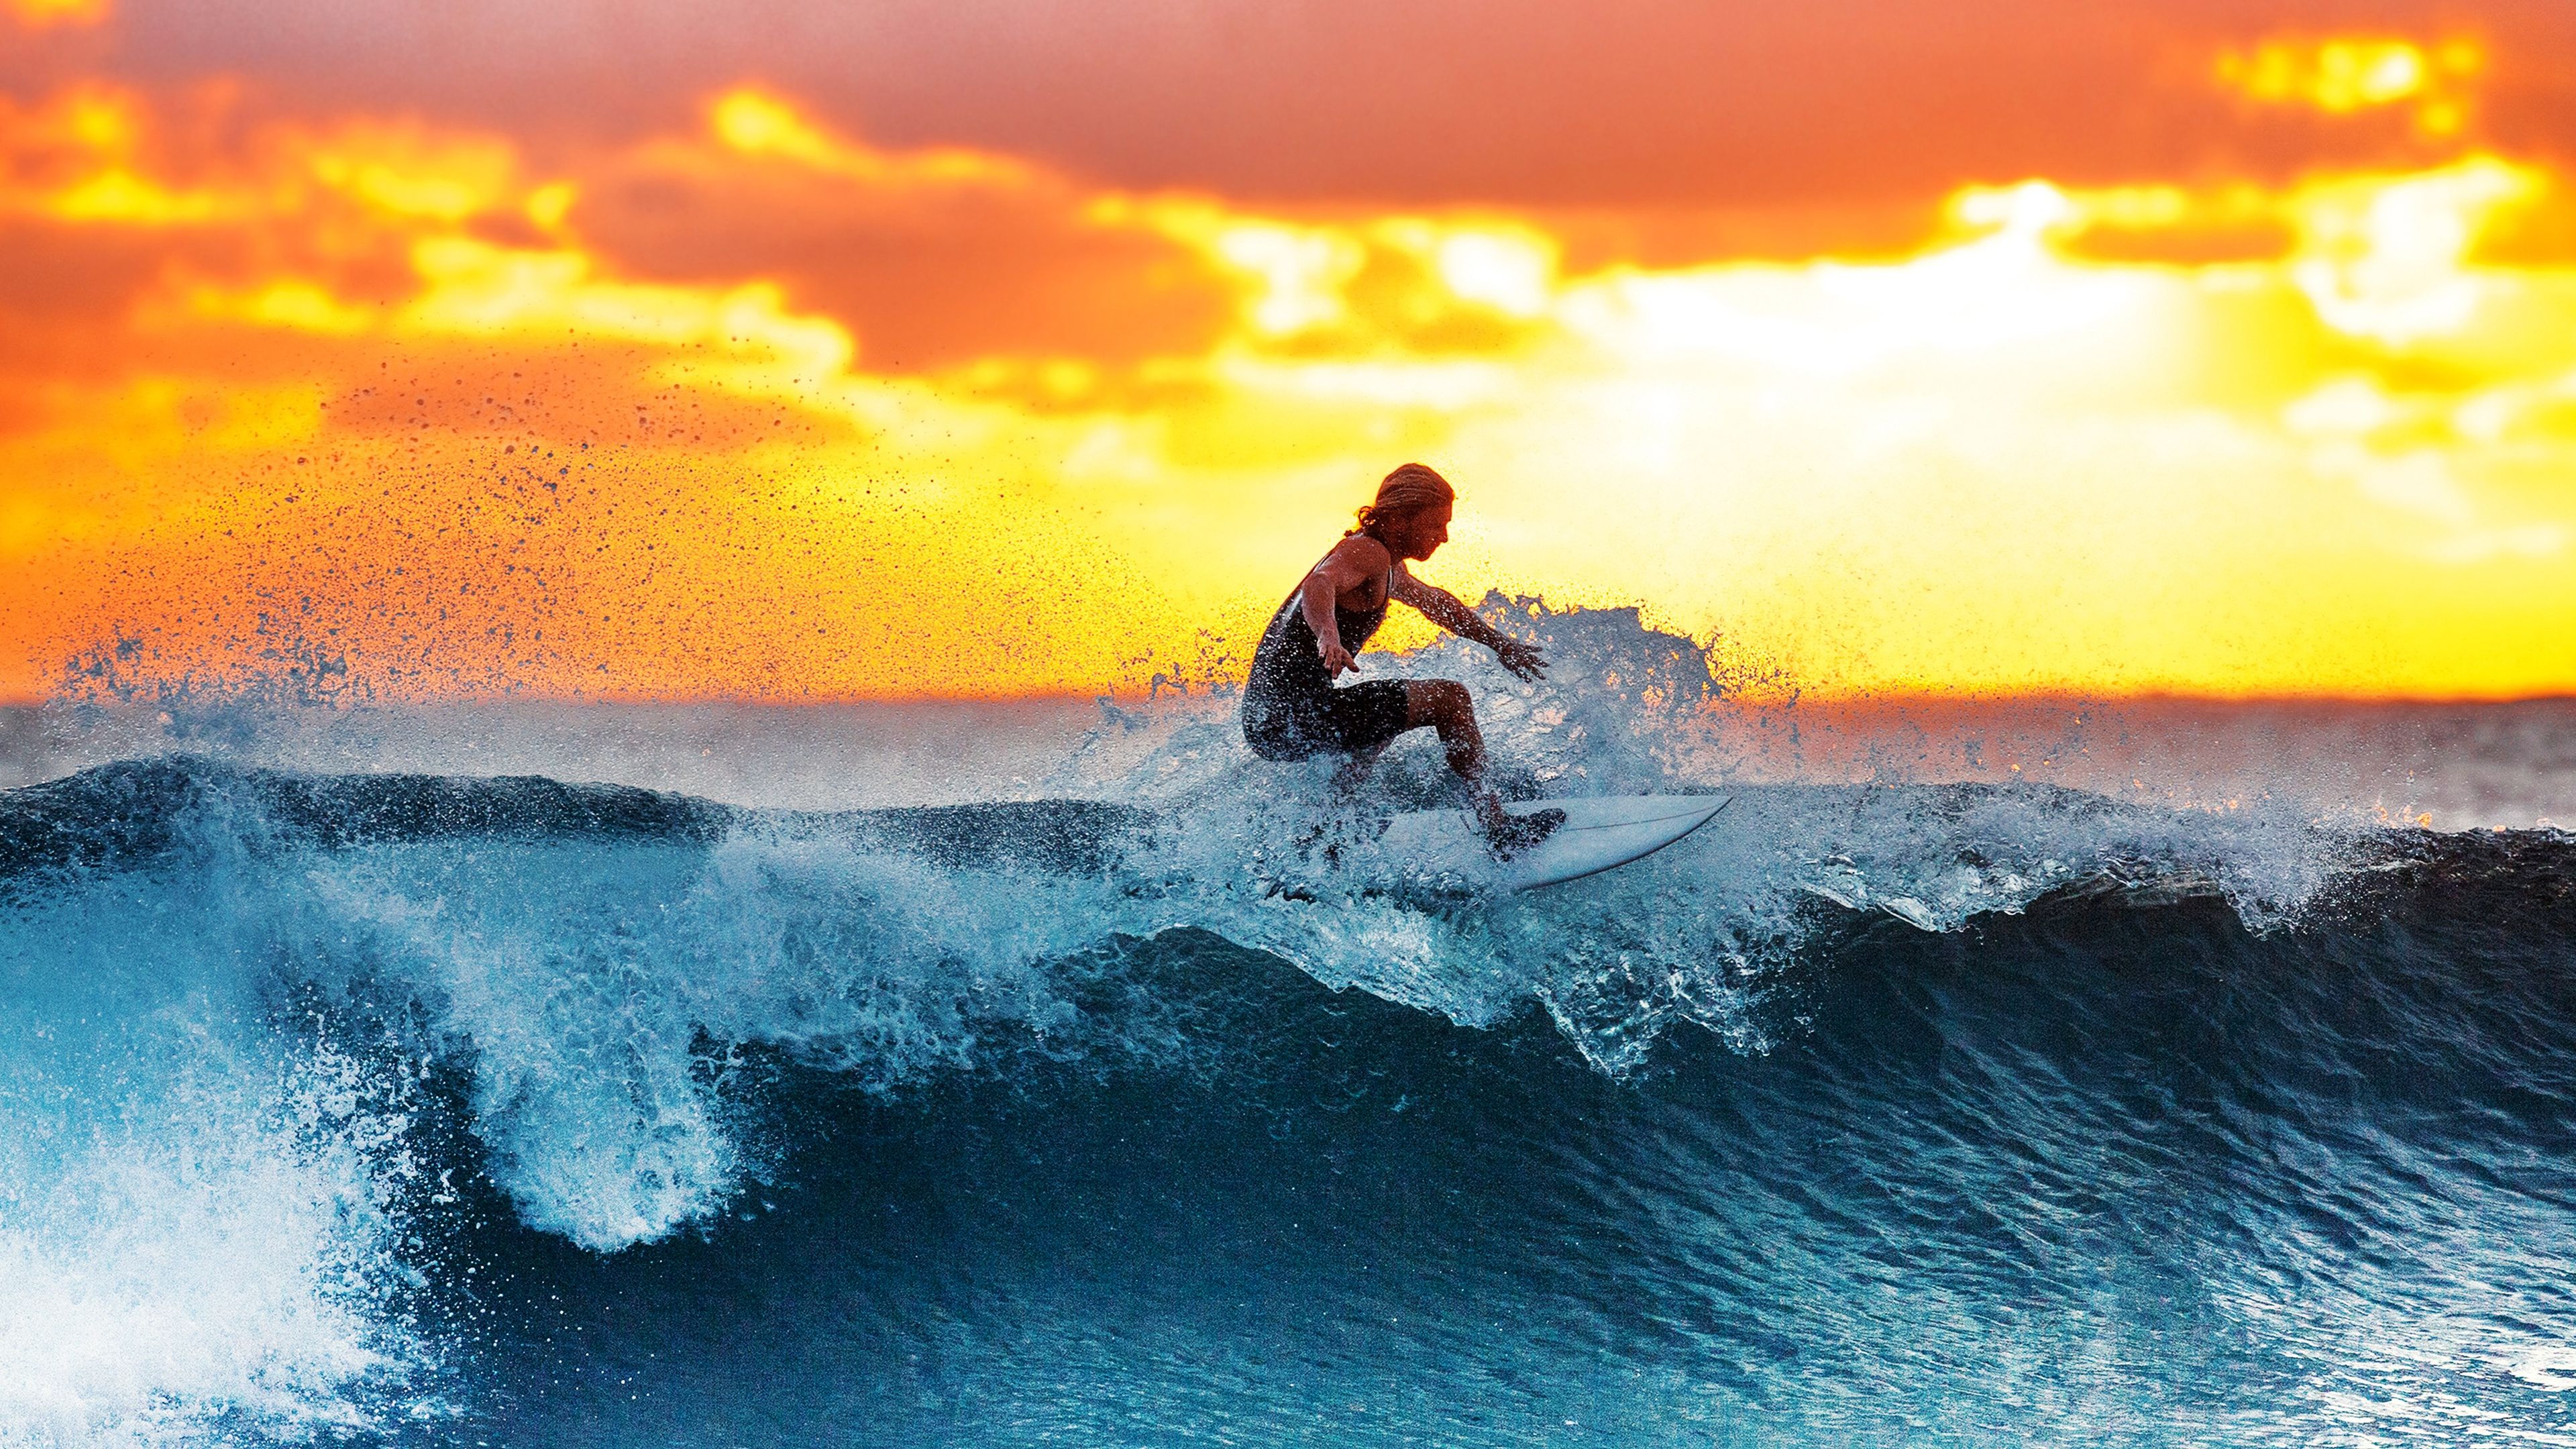 sunset rtro travel rtrolifestyle nature water surf surfing  beautiful  Surfing pictures Nature water Surfing